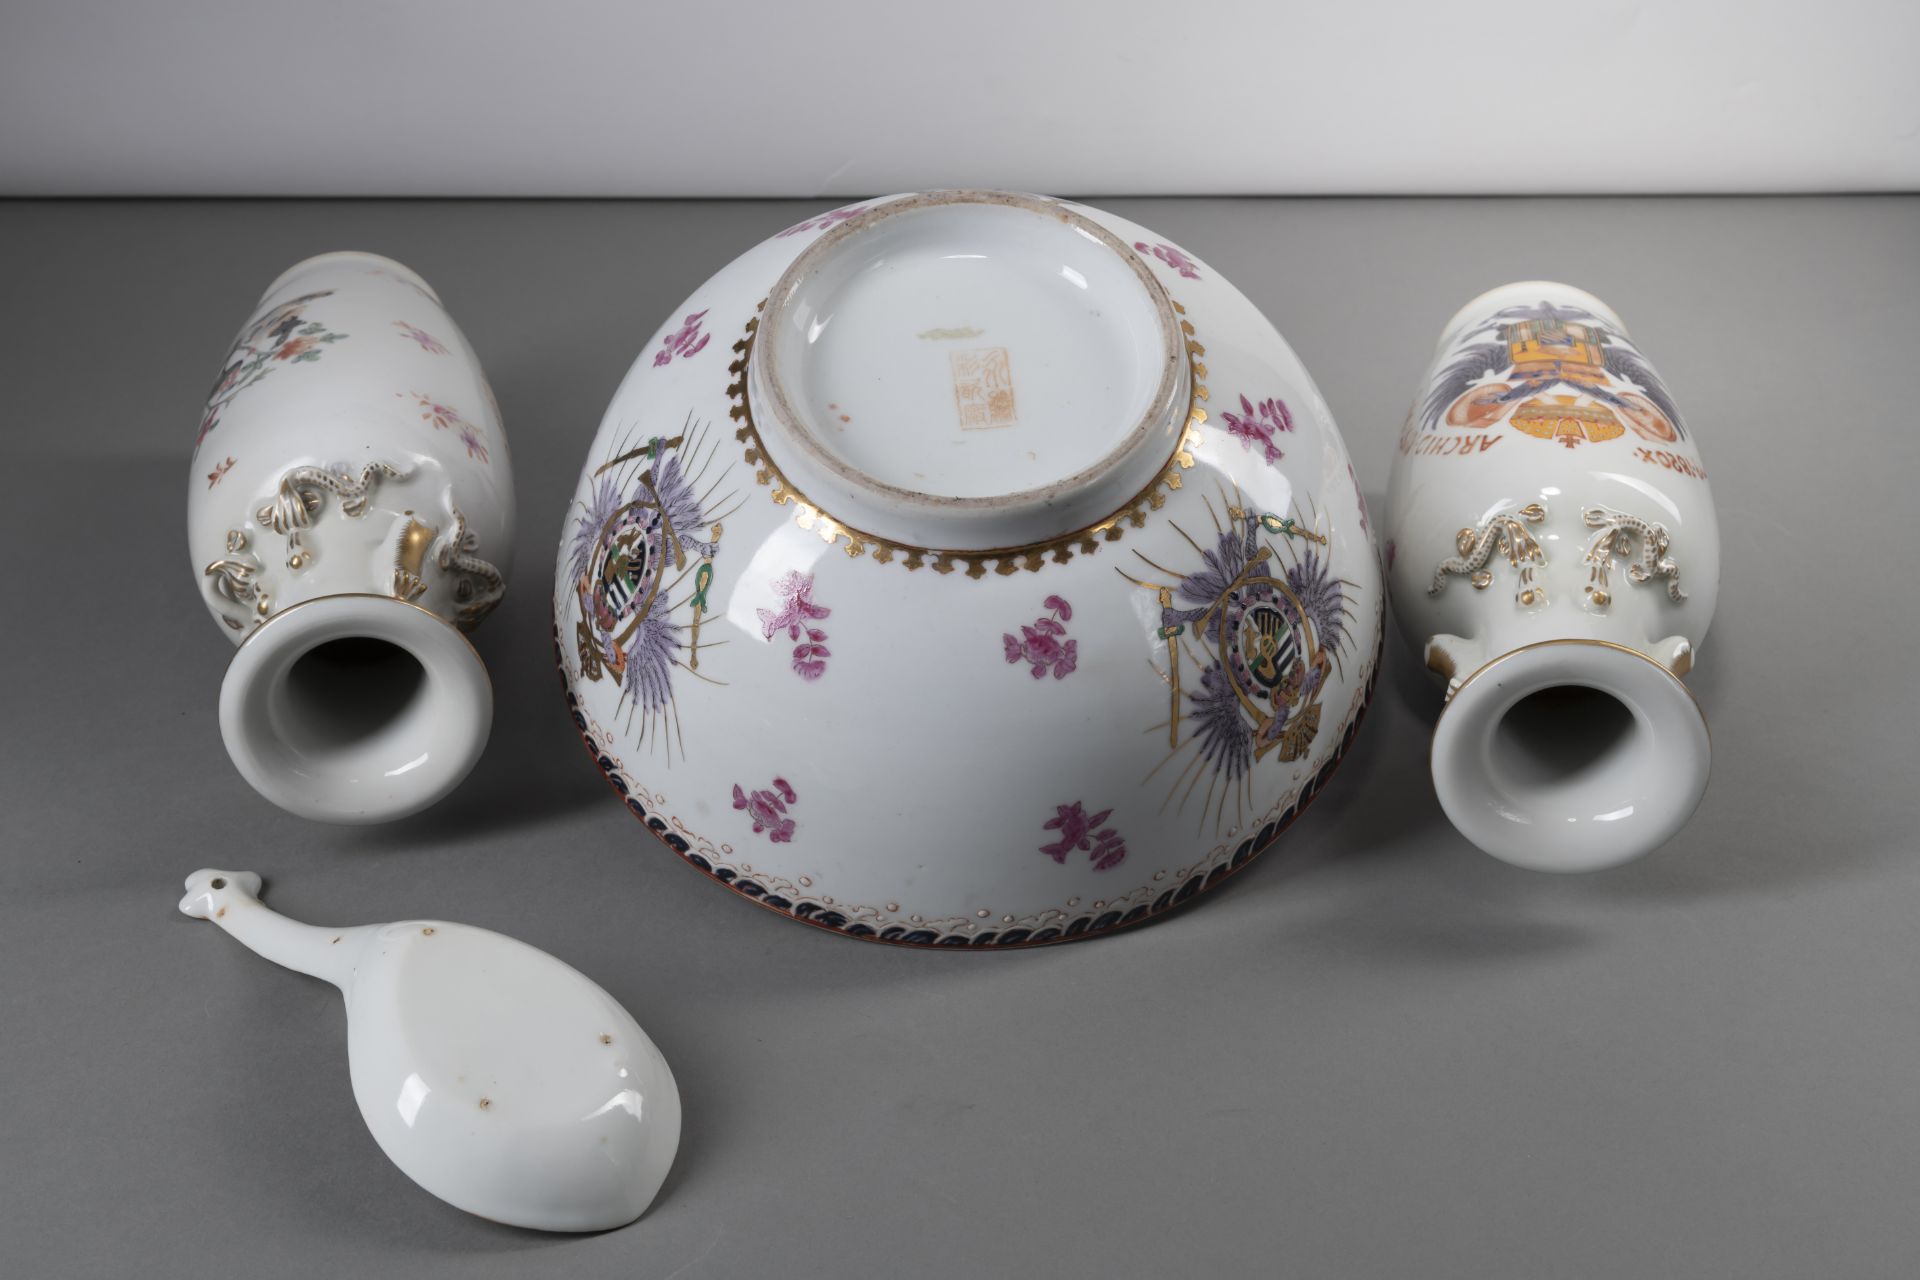 A PAIR OF 'FAMILLE ROSE' PORCELAIN VASES WITH AUSTRIAN COAT-OF-ARMS, AN ARMORIAL PUNCH BOWL, AND A - Image 5 of 5